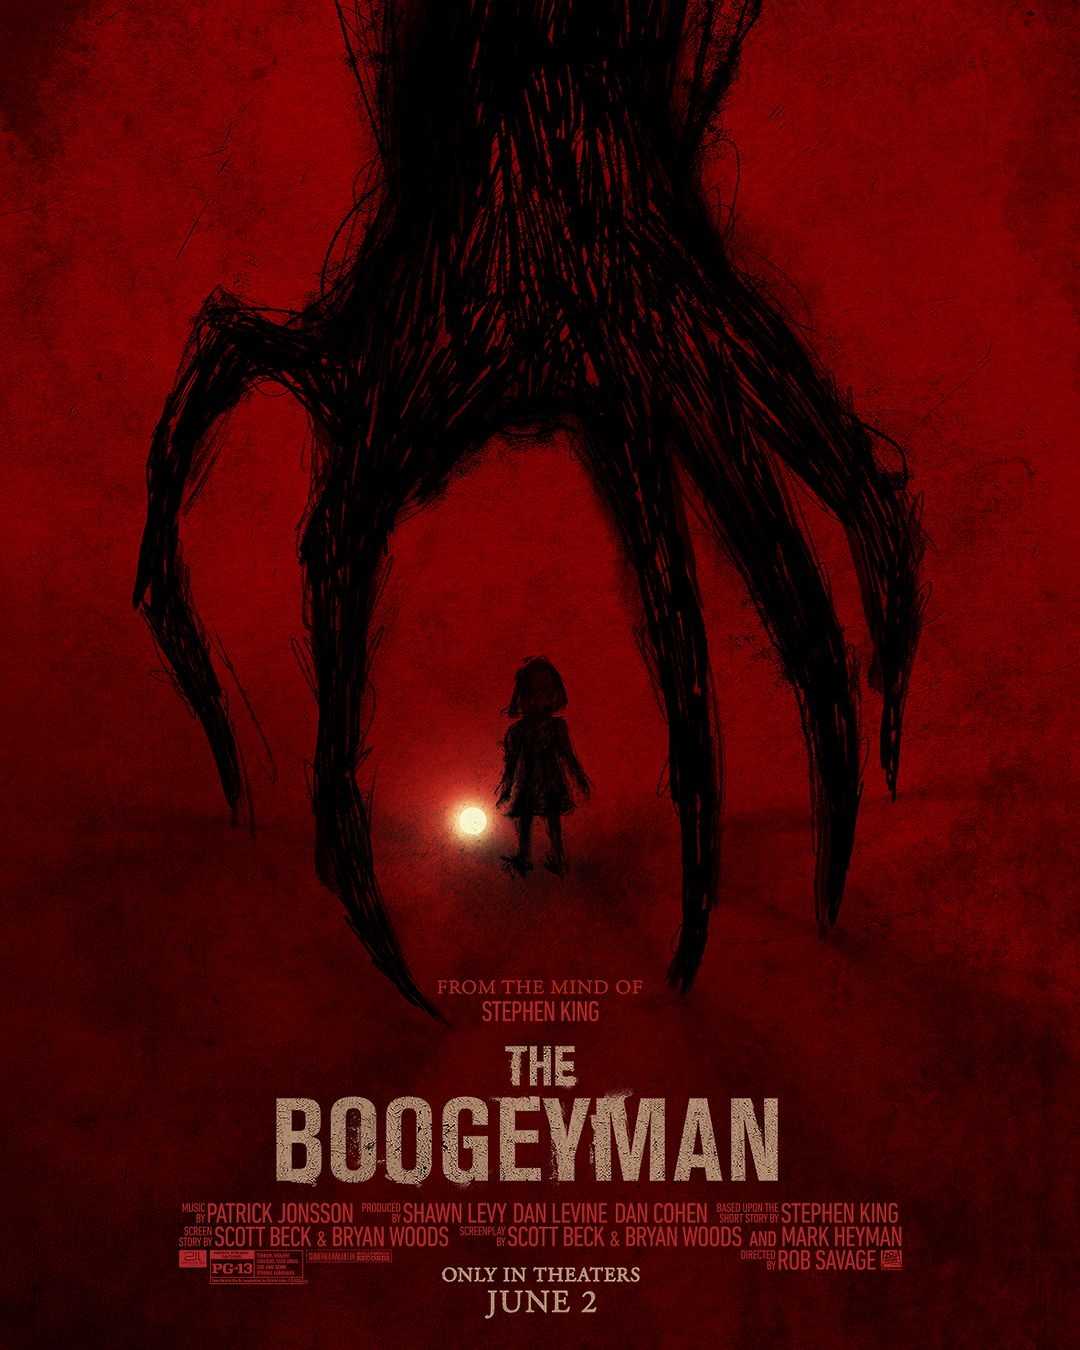 The Boogeyman Movie (2023) Cast, Release Date, Story, Budget, Collection, Poster, Trailer, Review